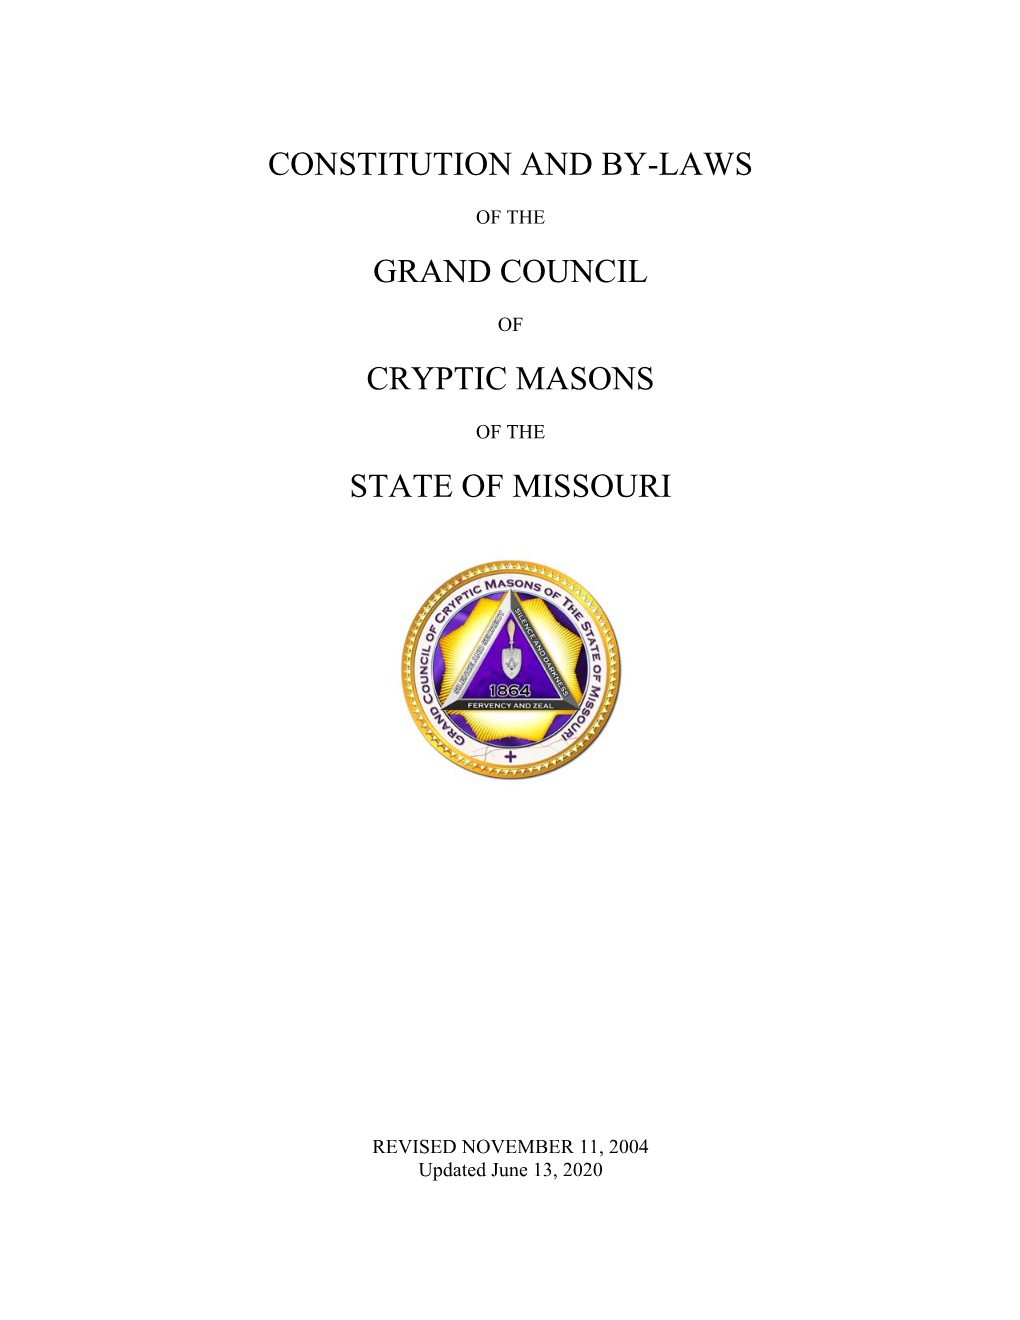 Constitution and By-Laws Grand Council Cryptic